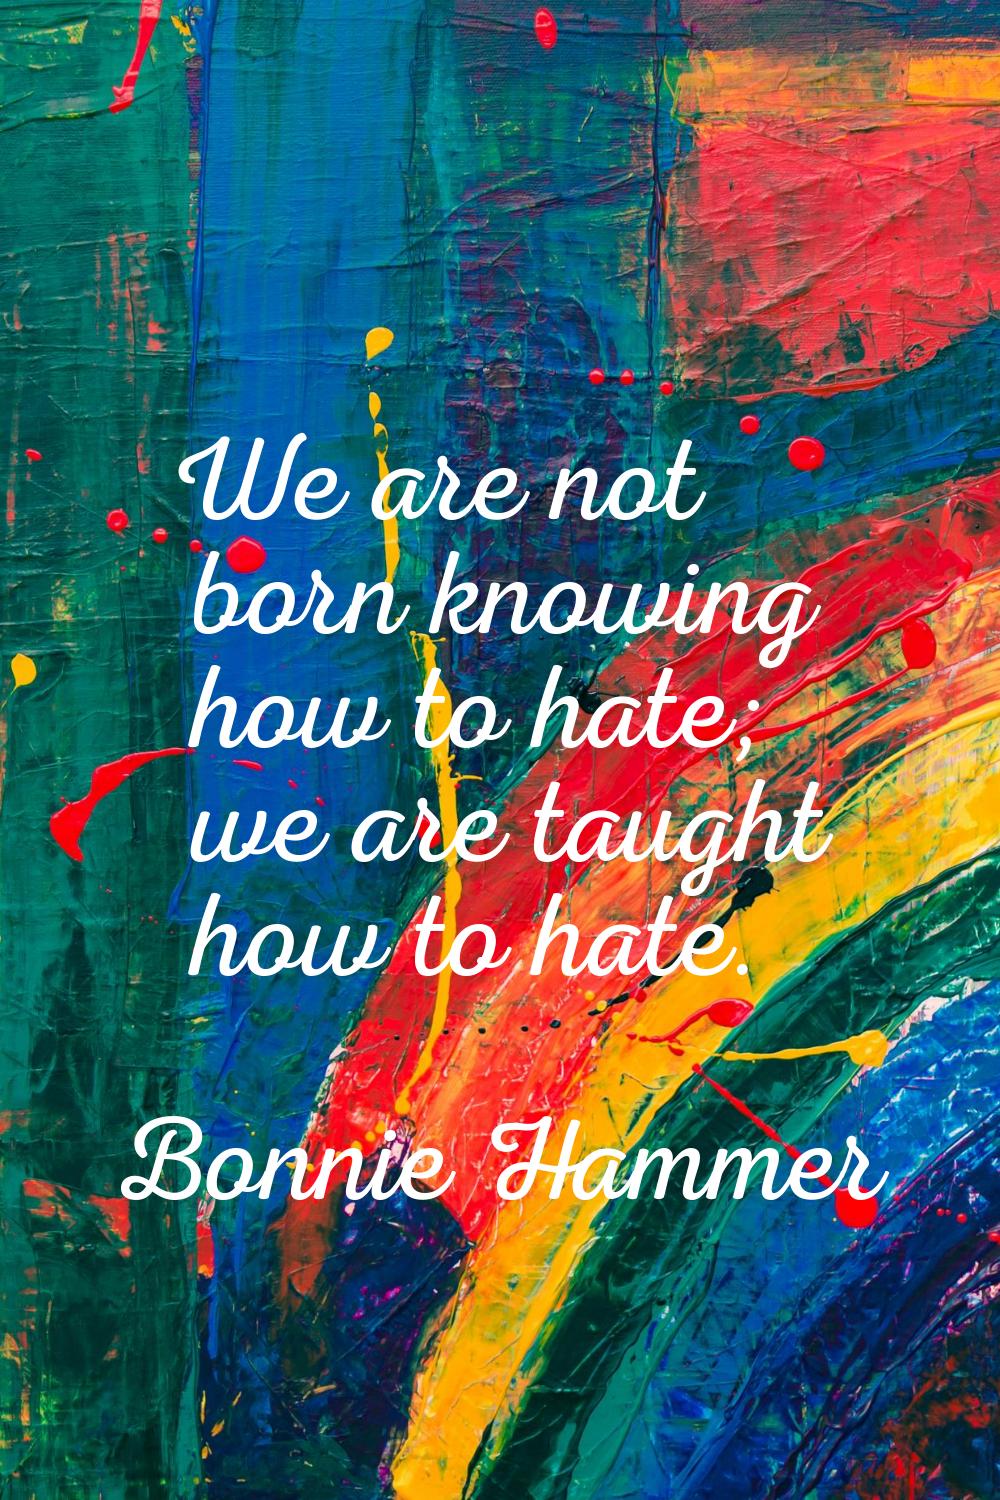 We are not born knowing how to hate; we are taught how to hate.